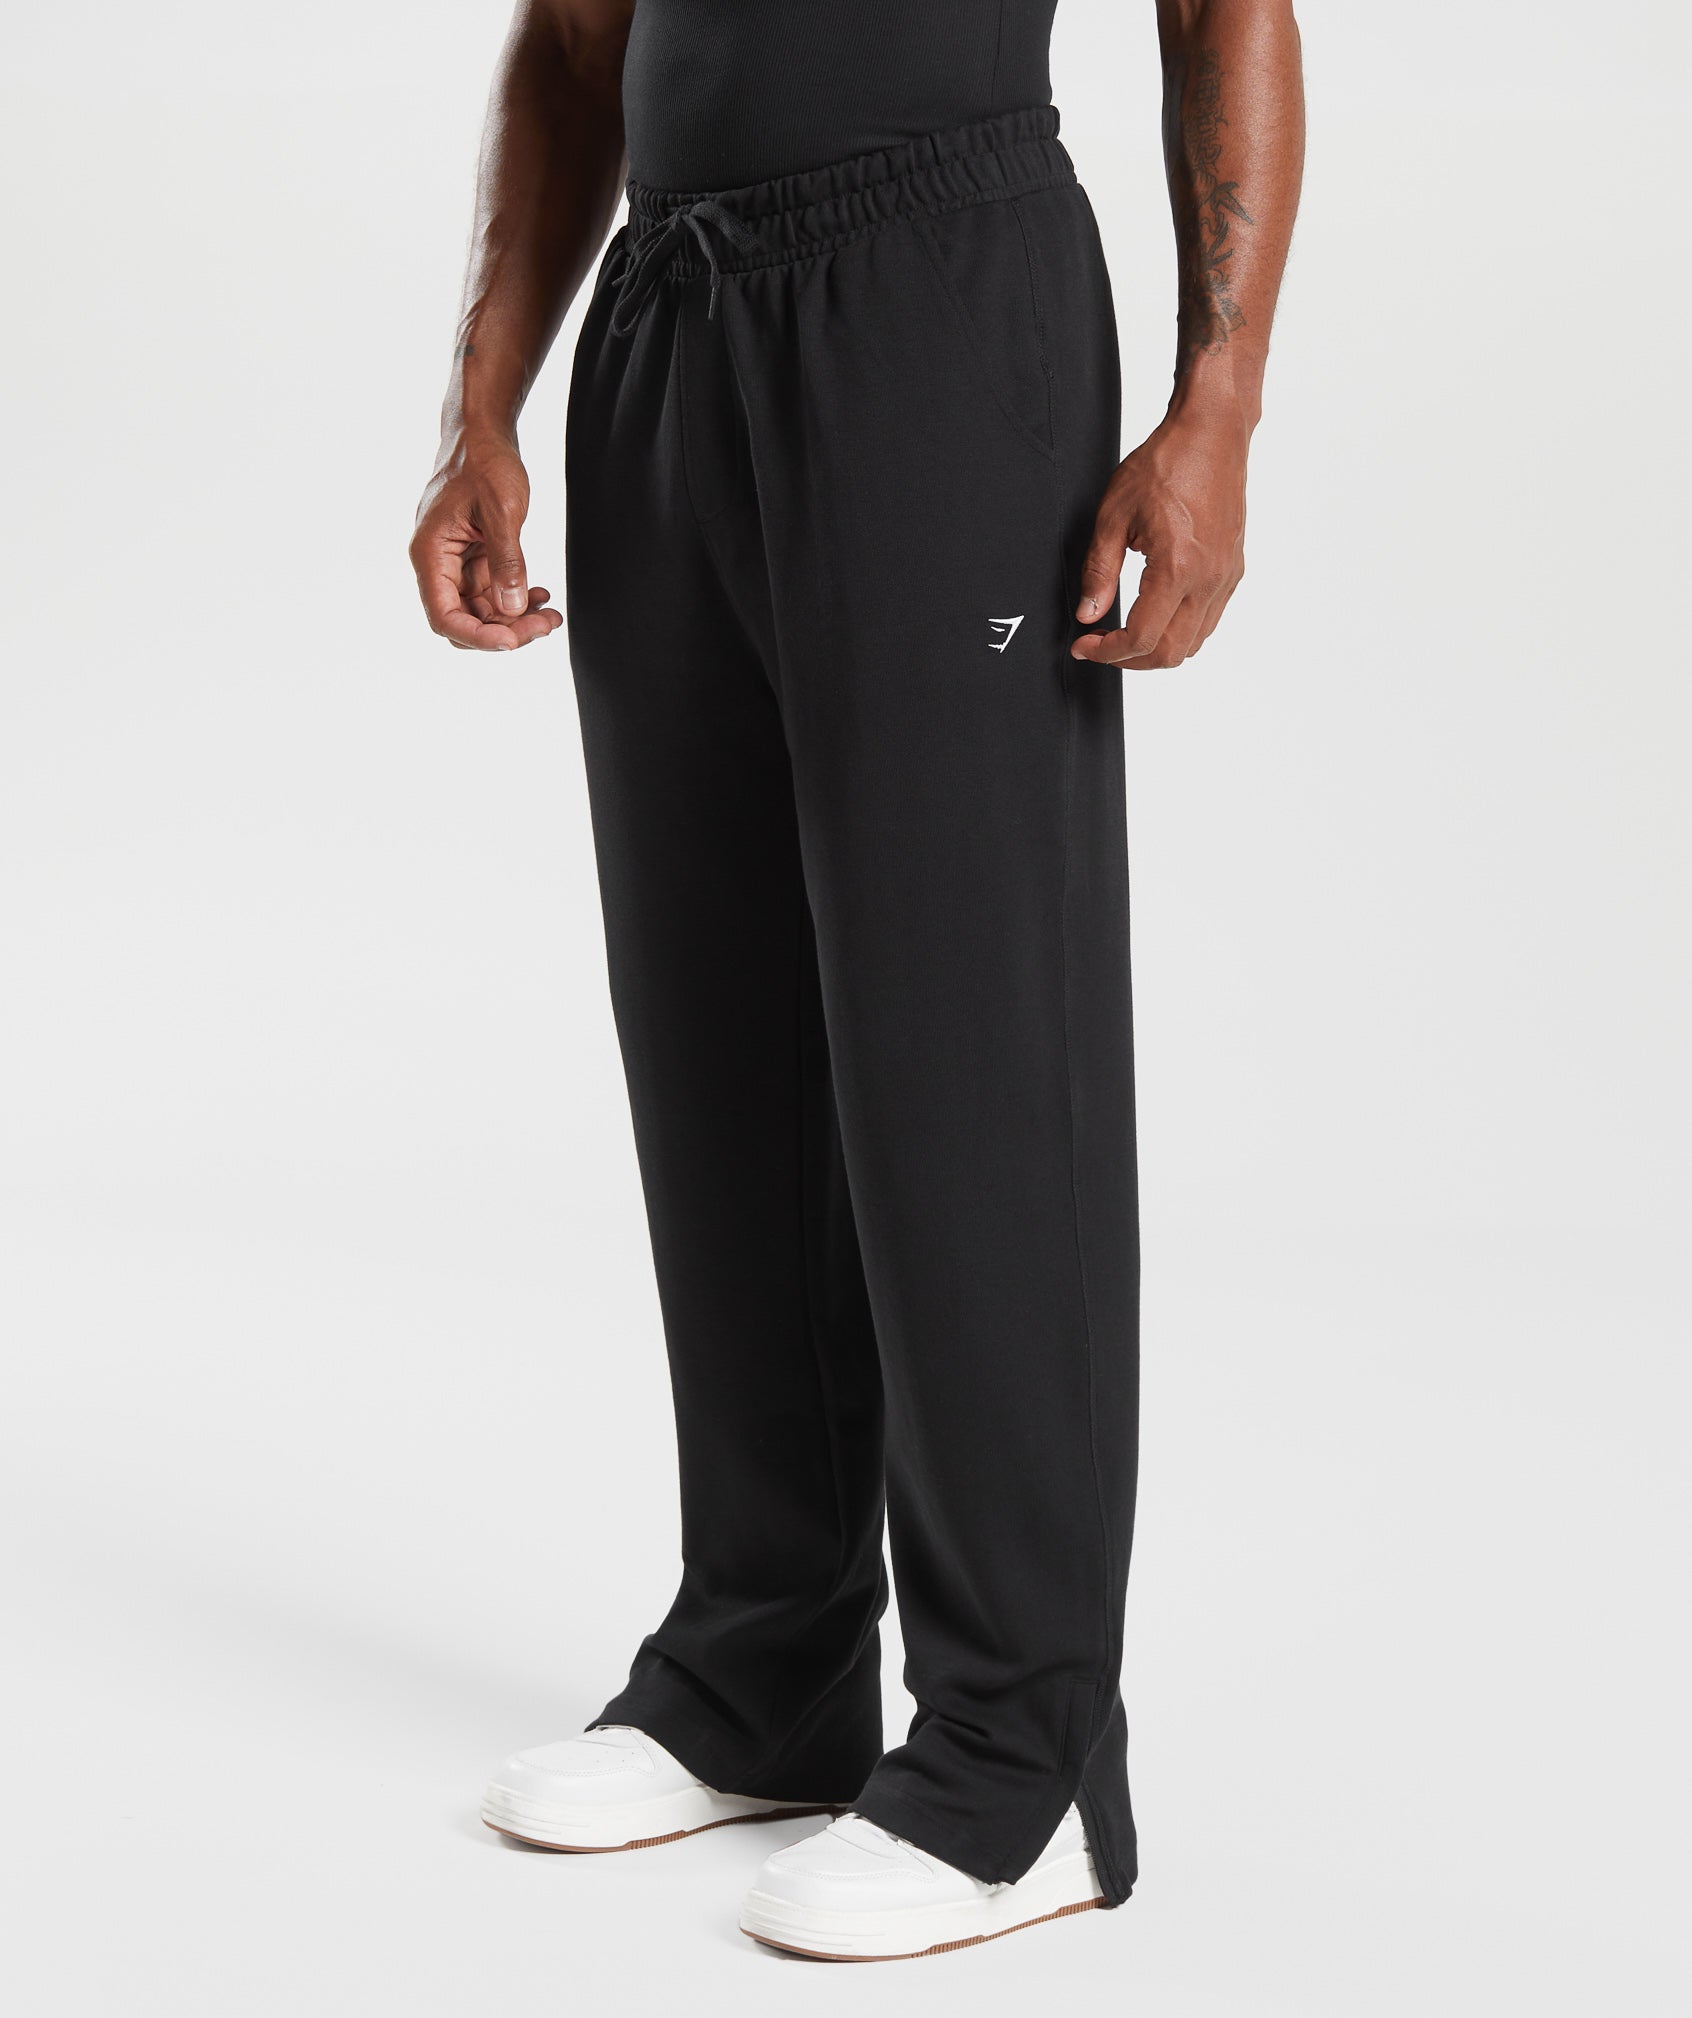 Rest Day Track Pants